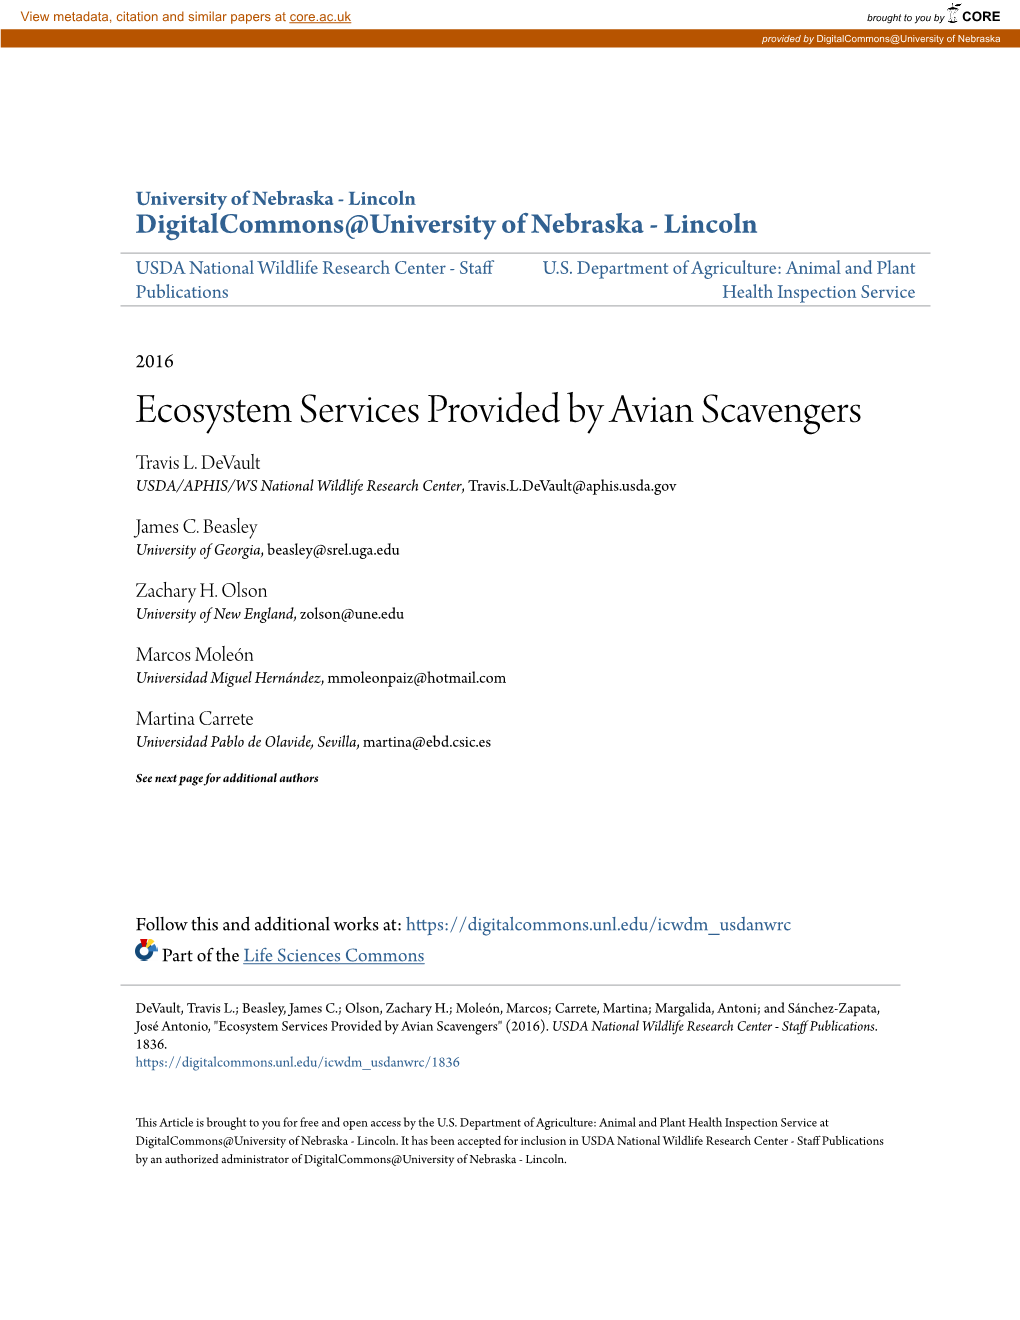 Ecosystem Services Provided by Avian Scavengers Travis L